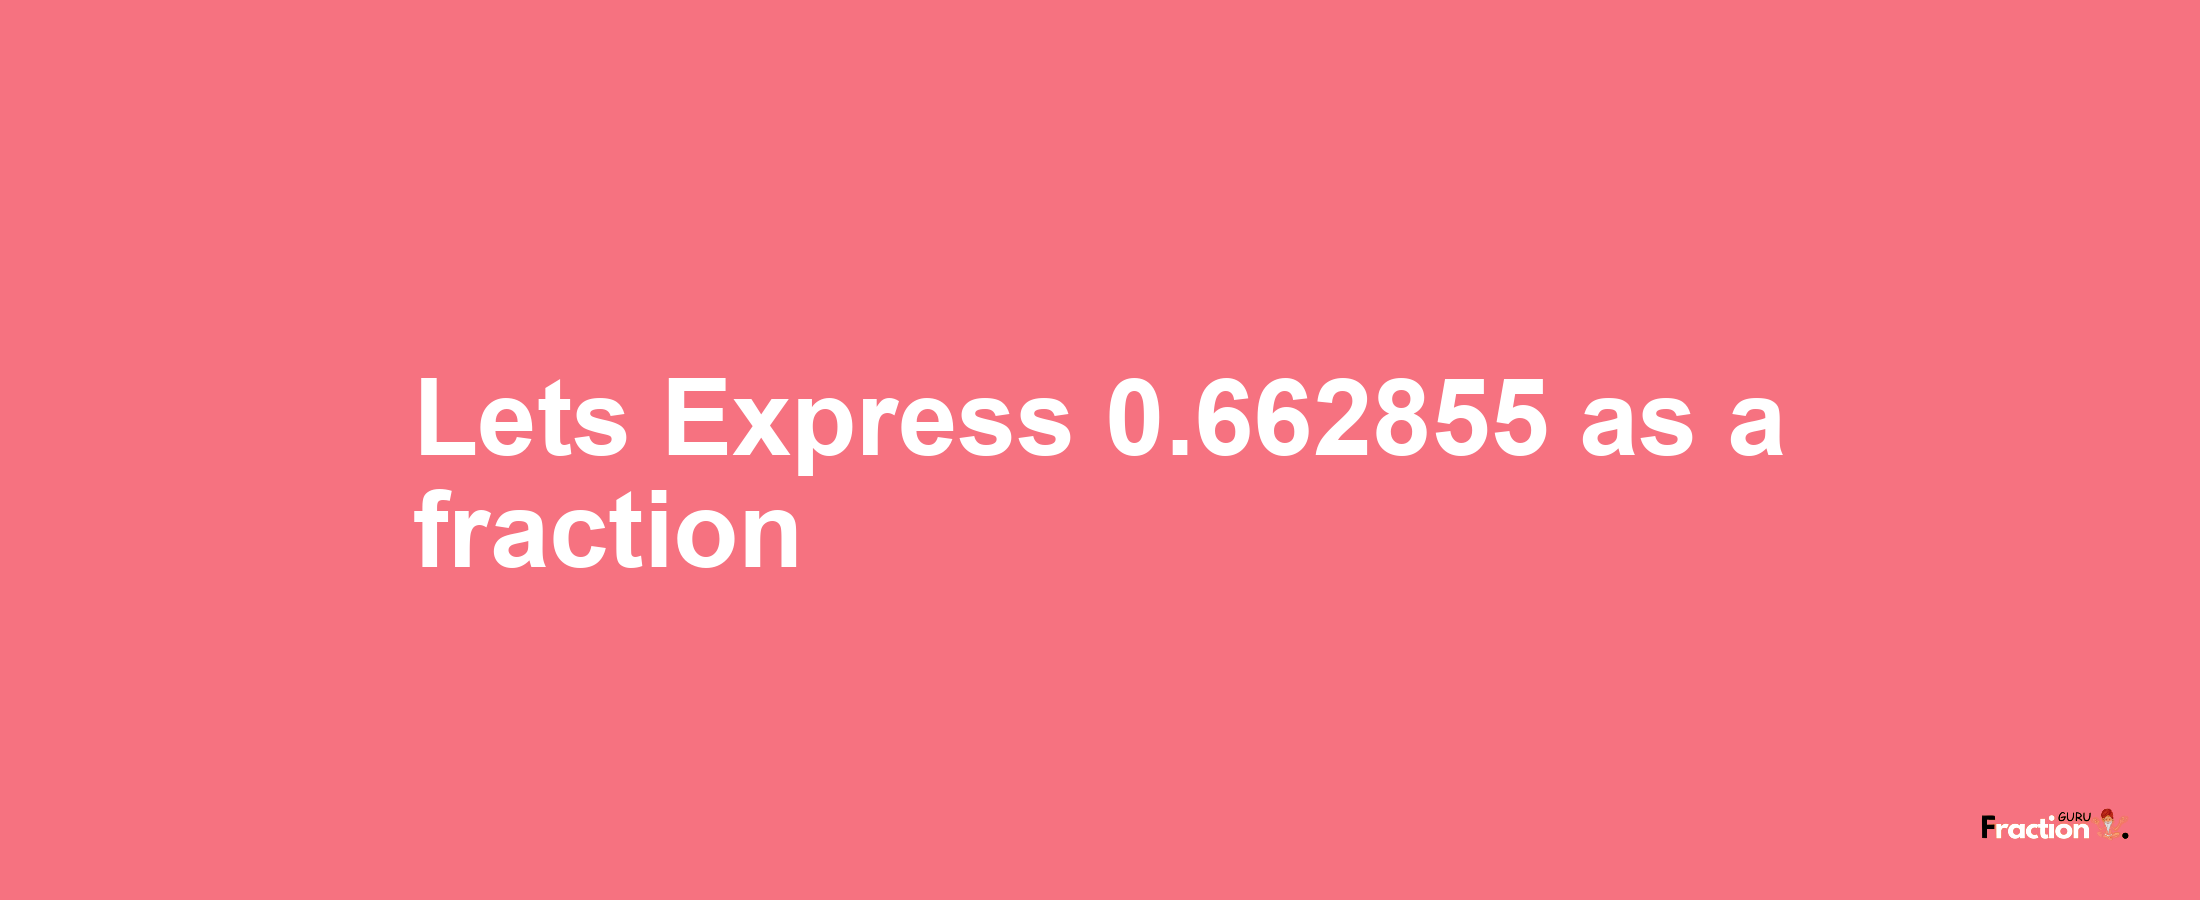 Lets Express 0.662855 as afraction